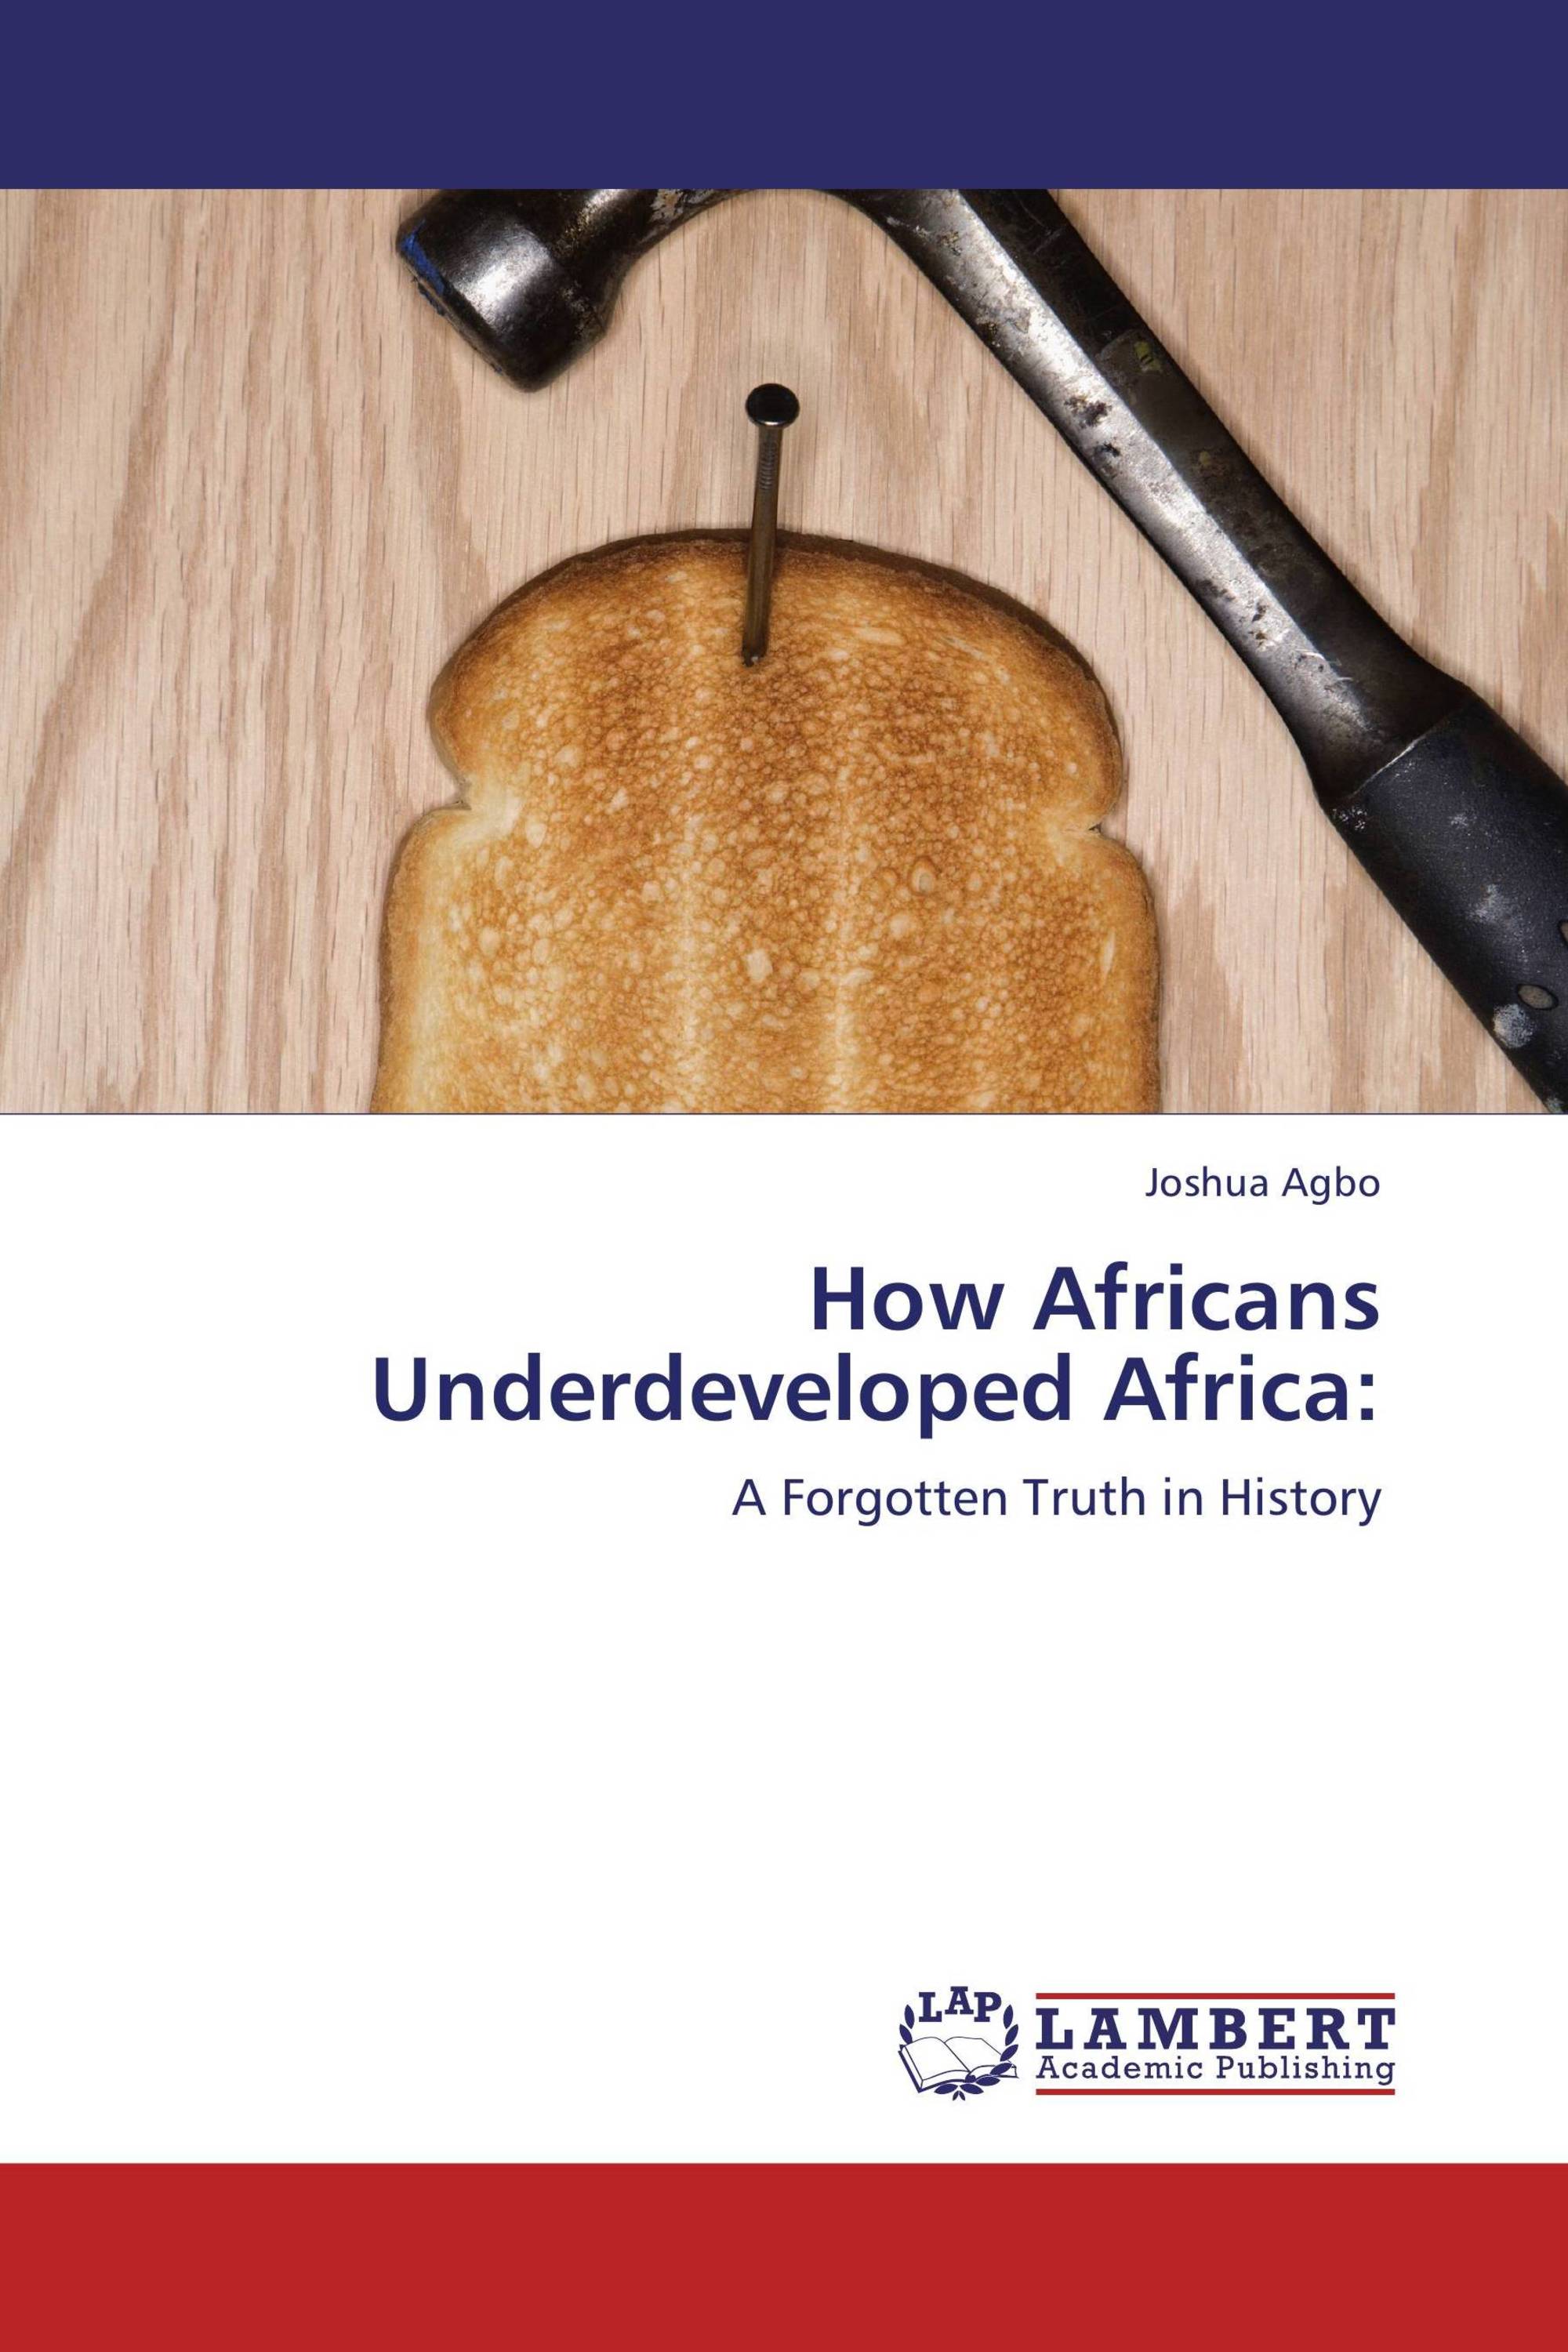 how the europe underdeveloped africa